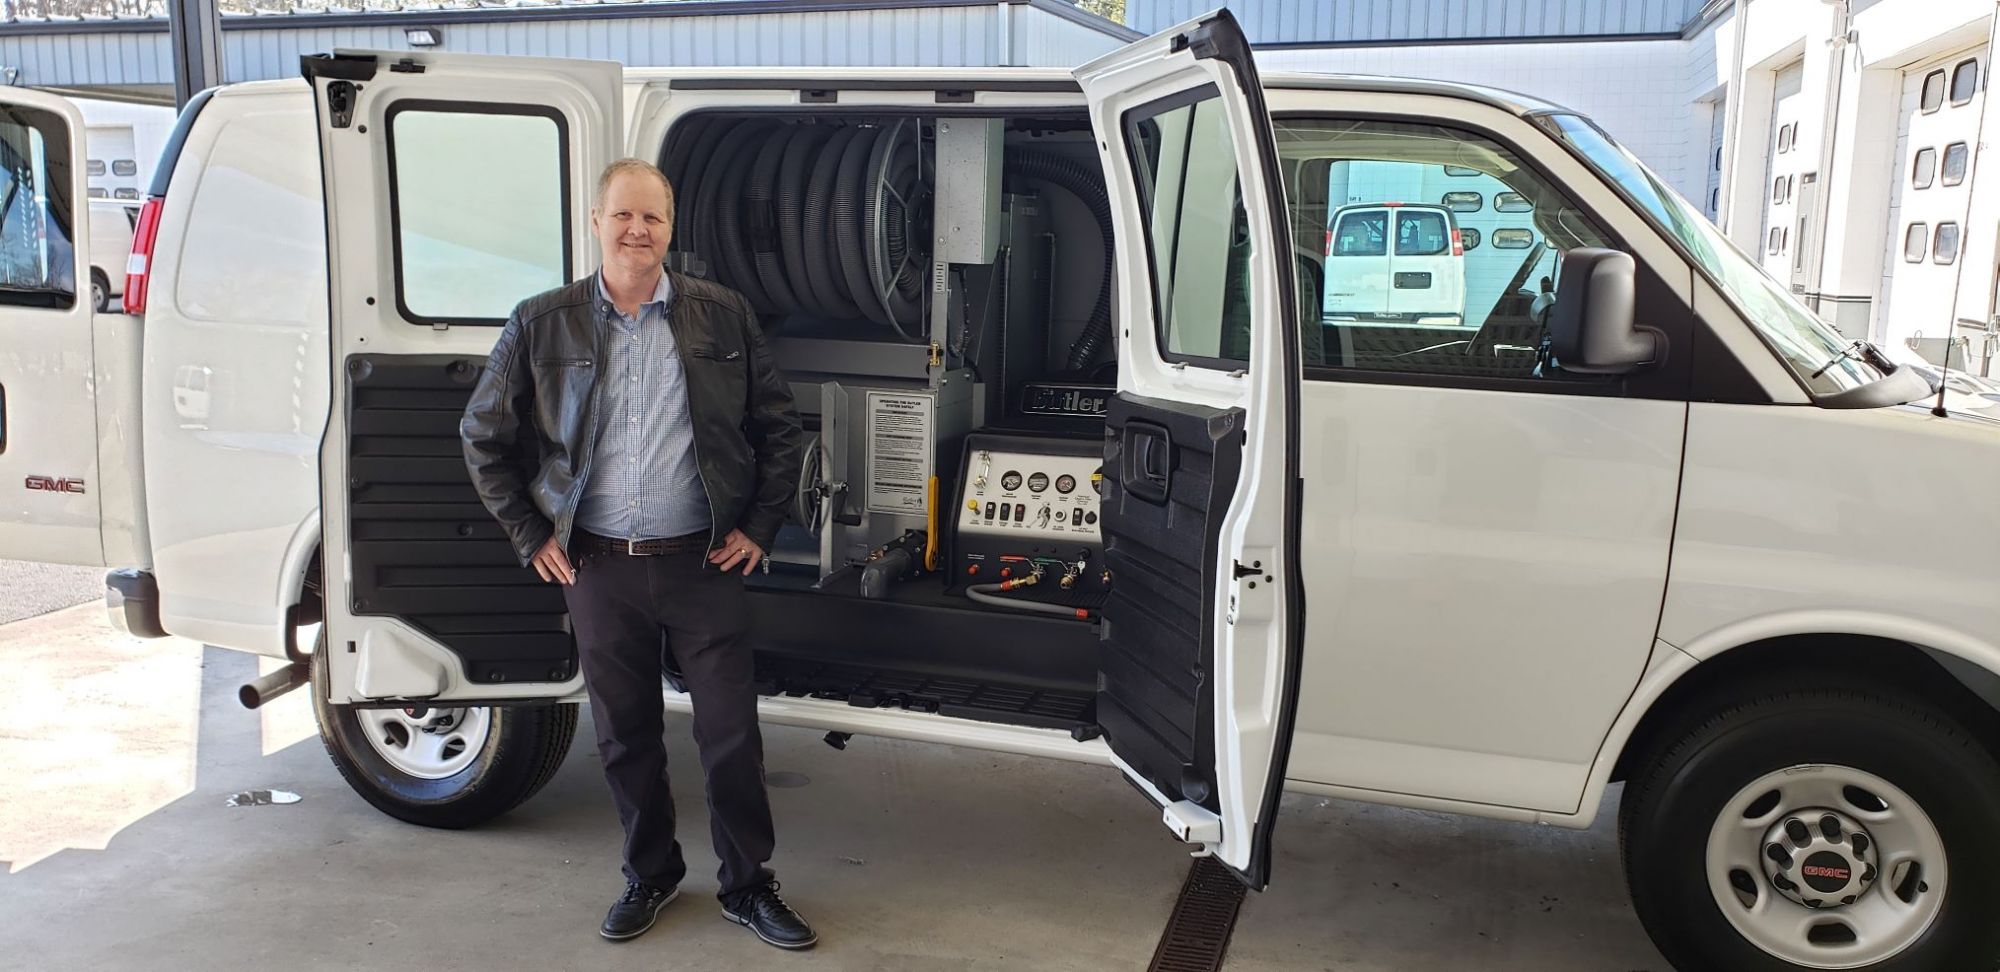 Mike Norton purchases New Butler Carpet Cleaning Equipment